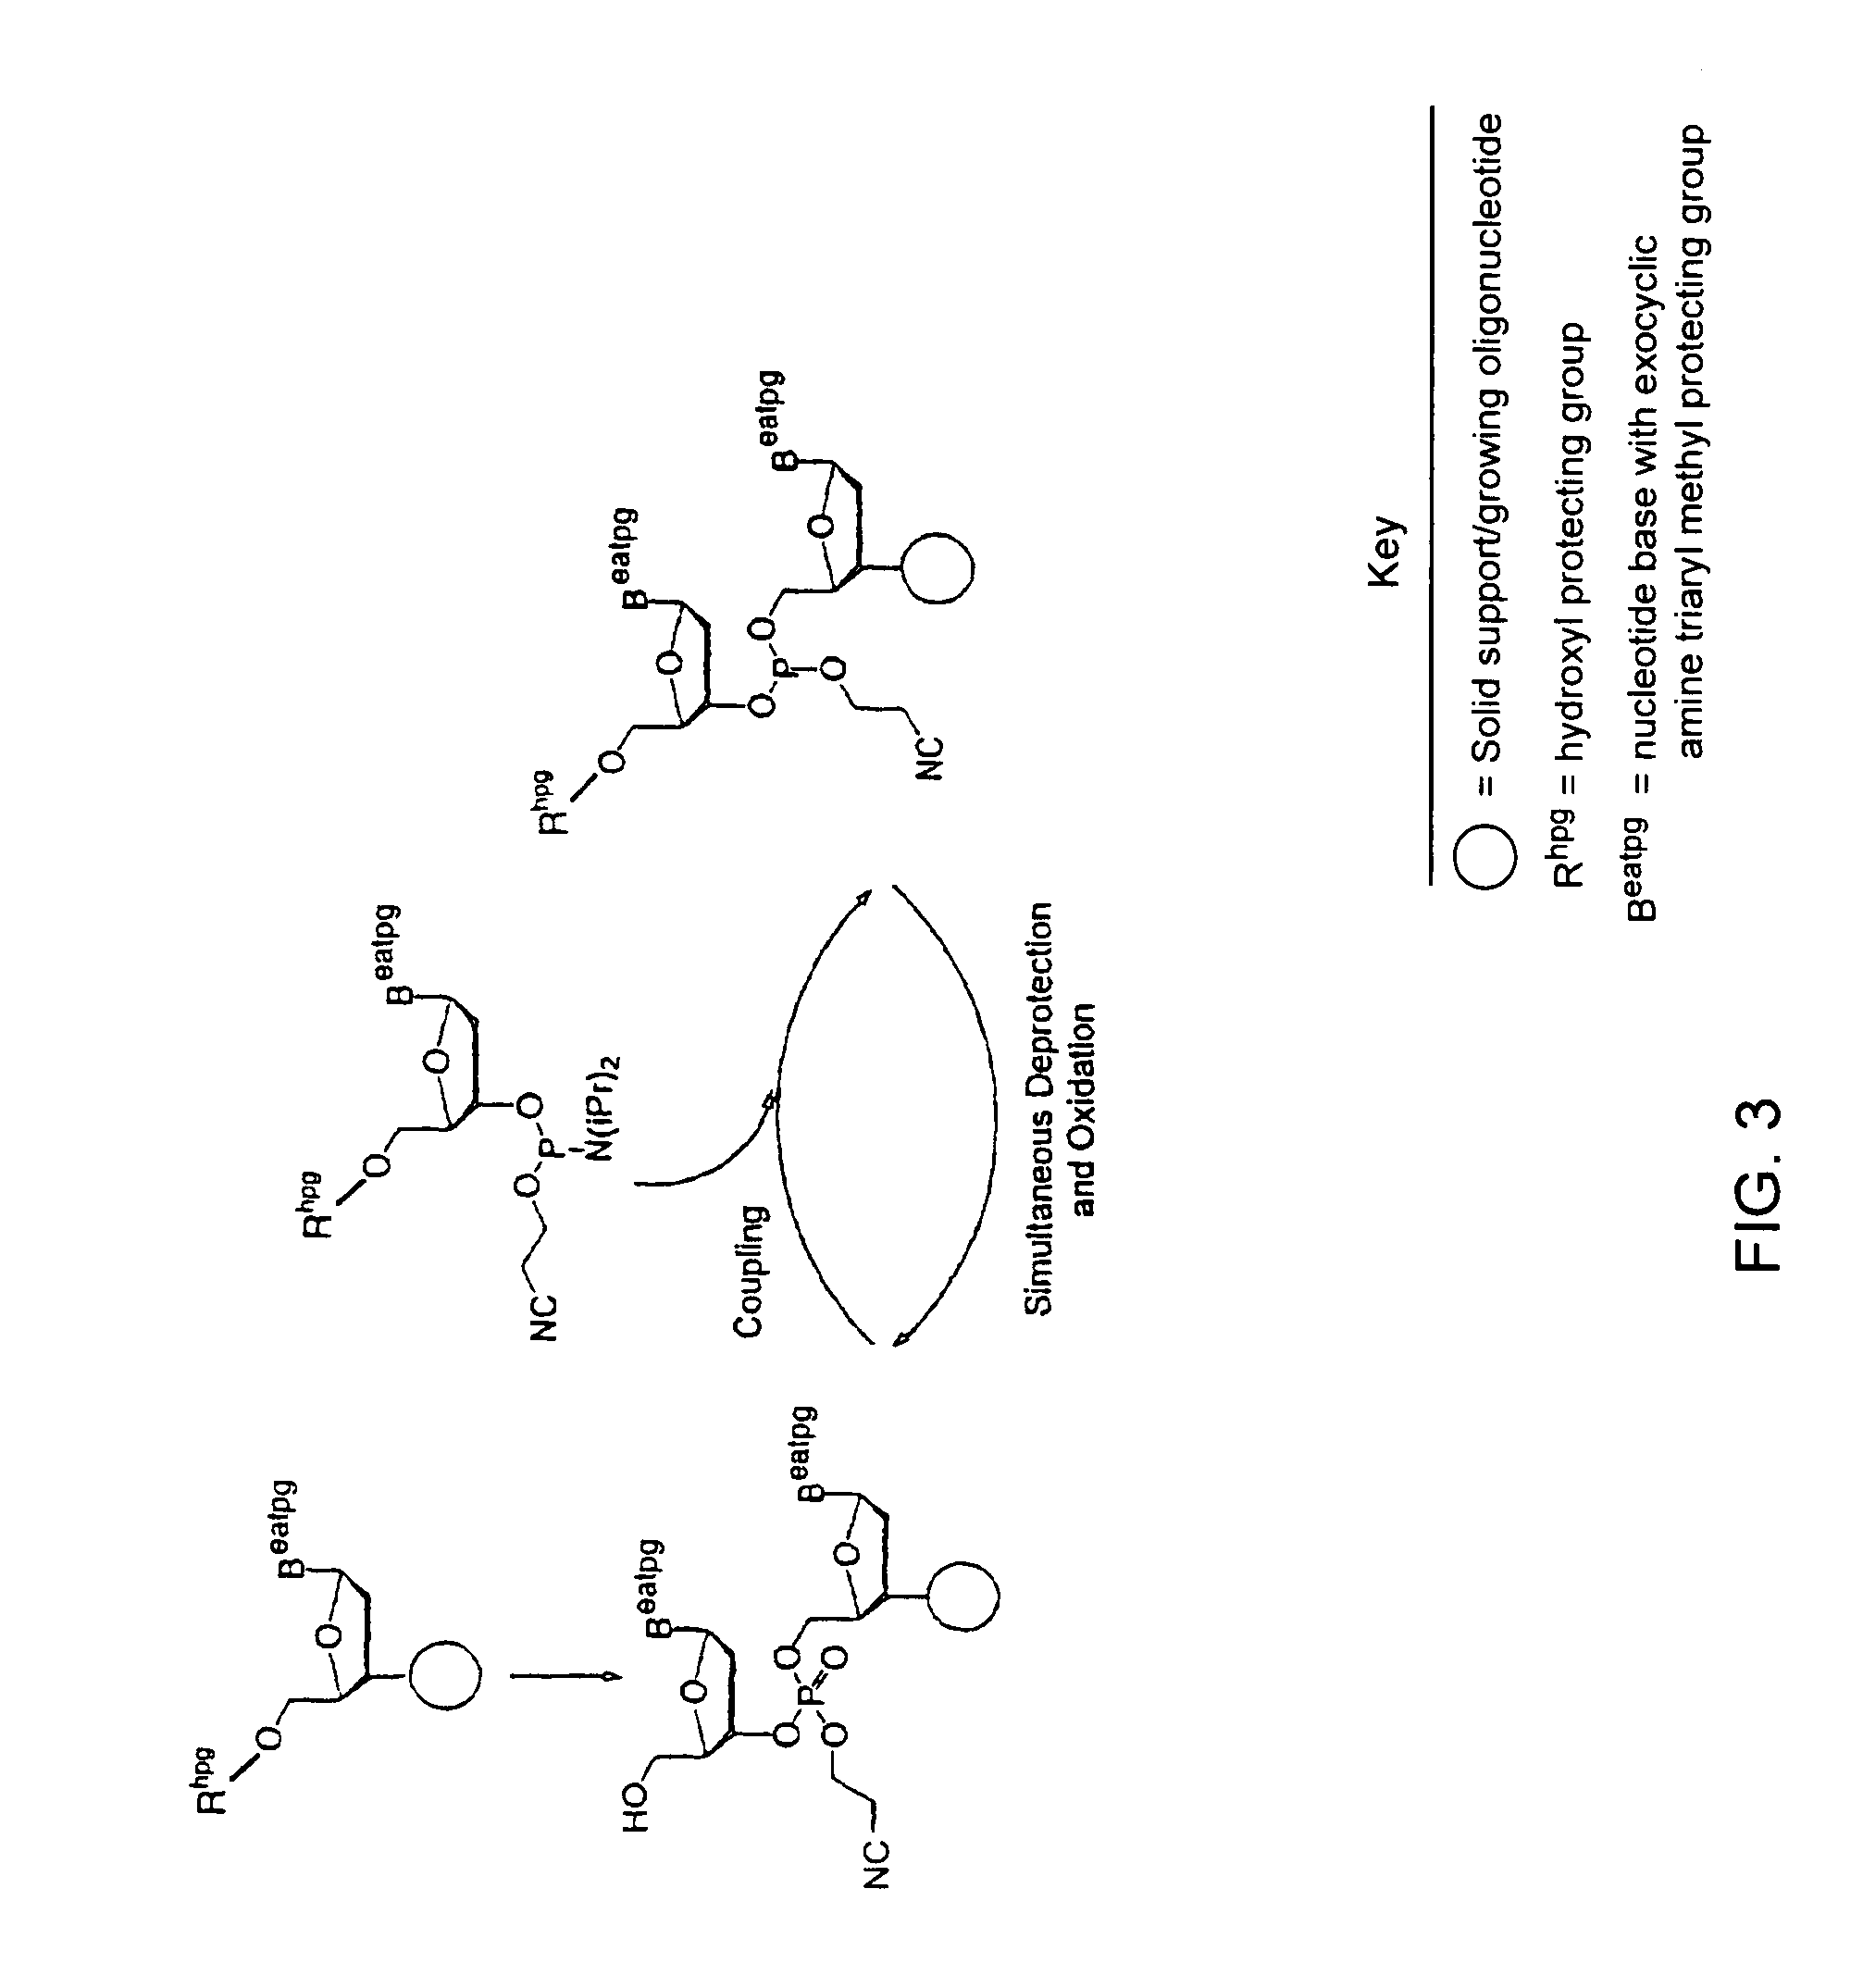 Precursors for two-step polynucleotide synthesis